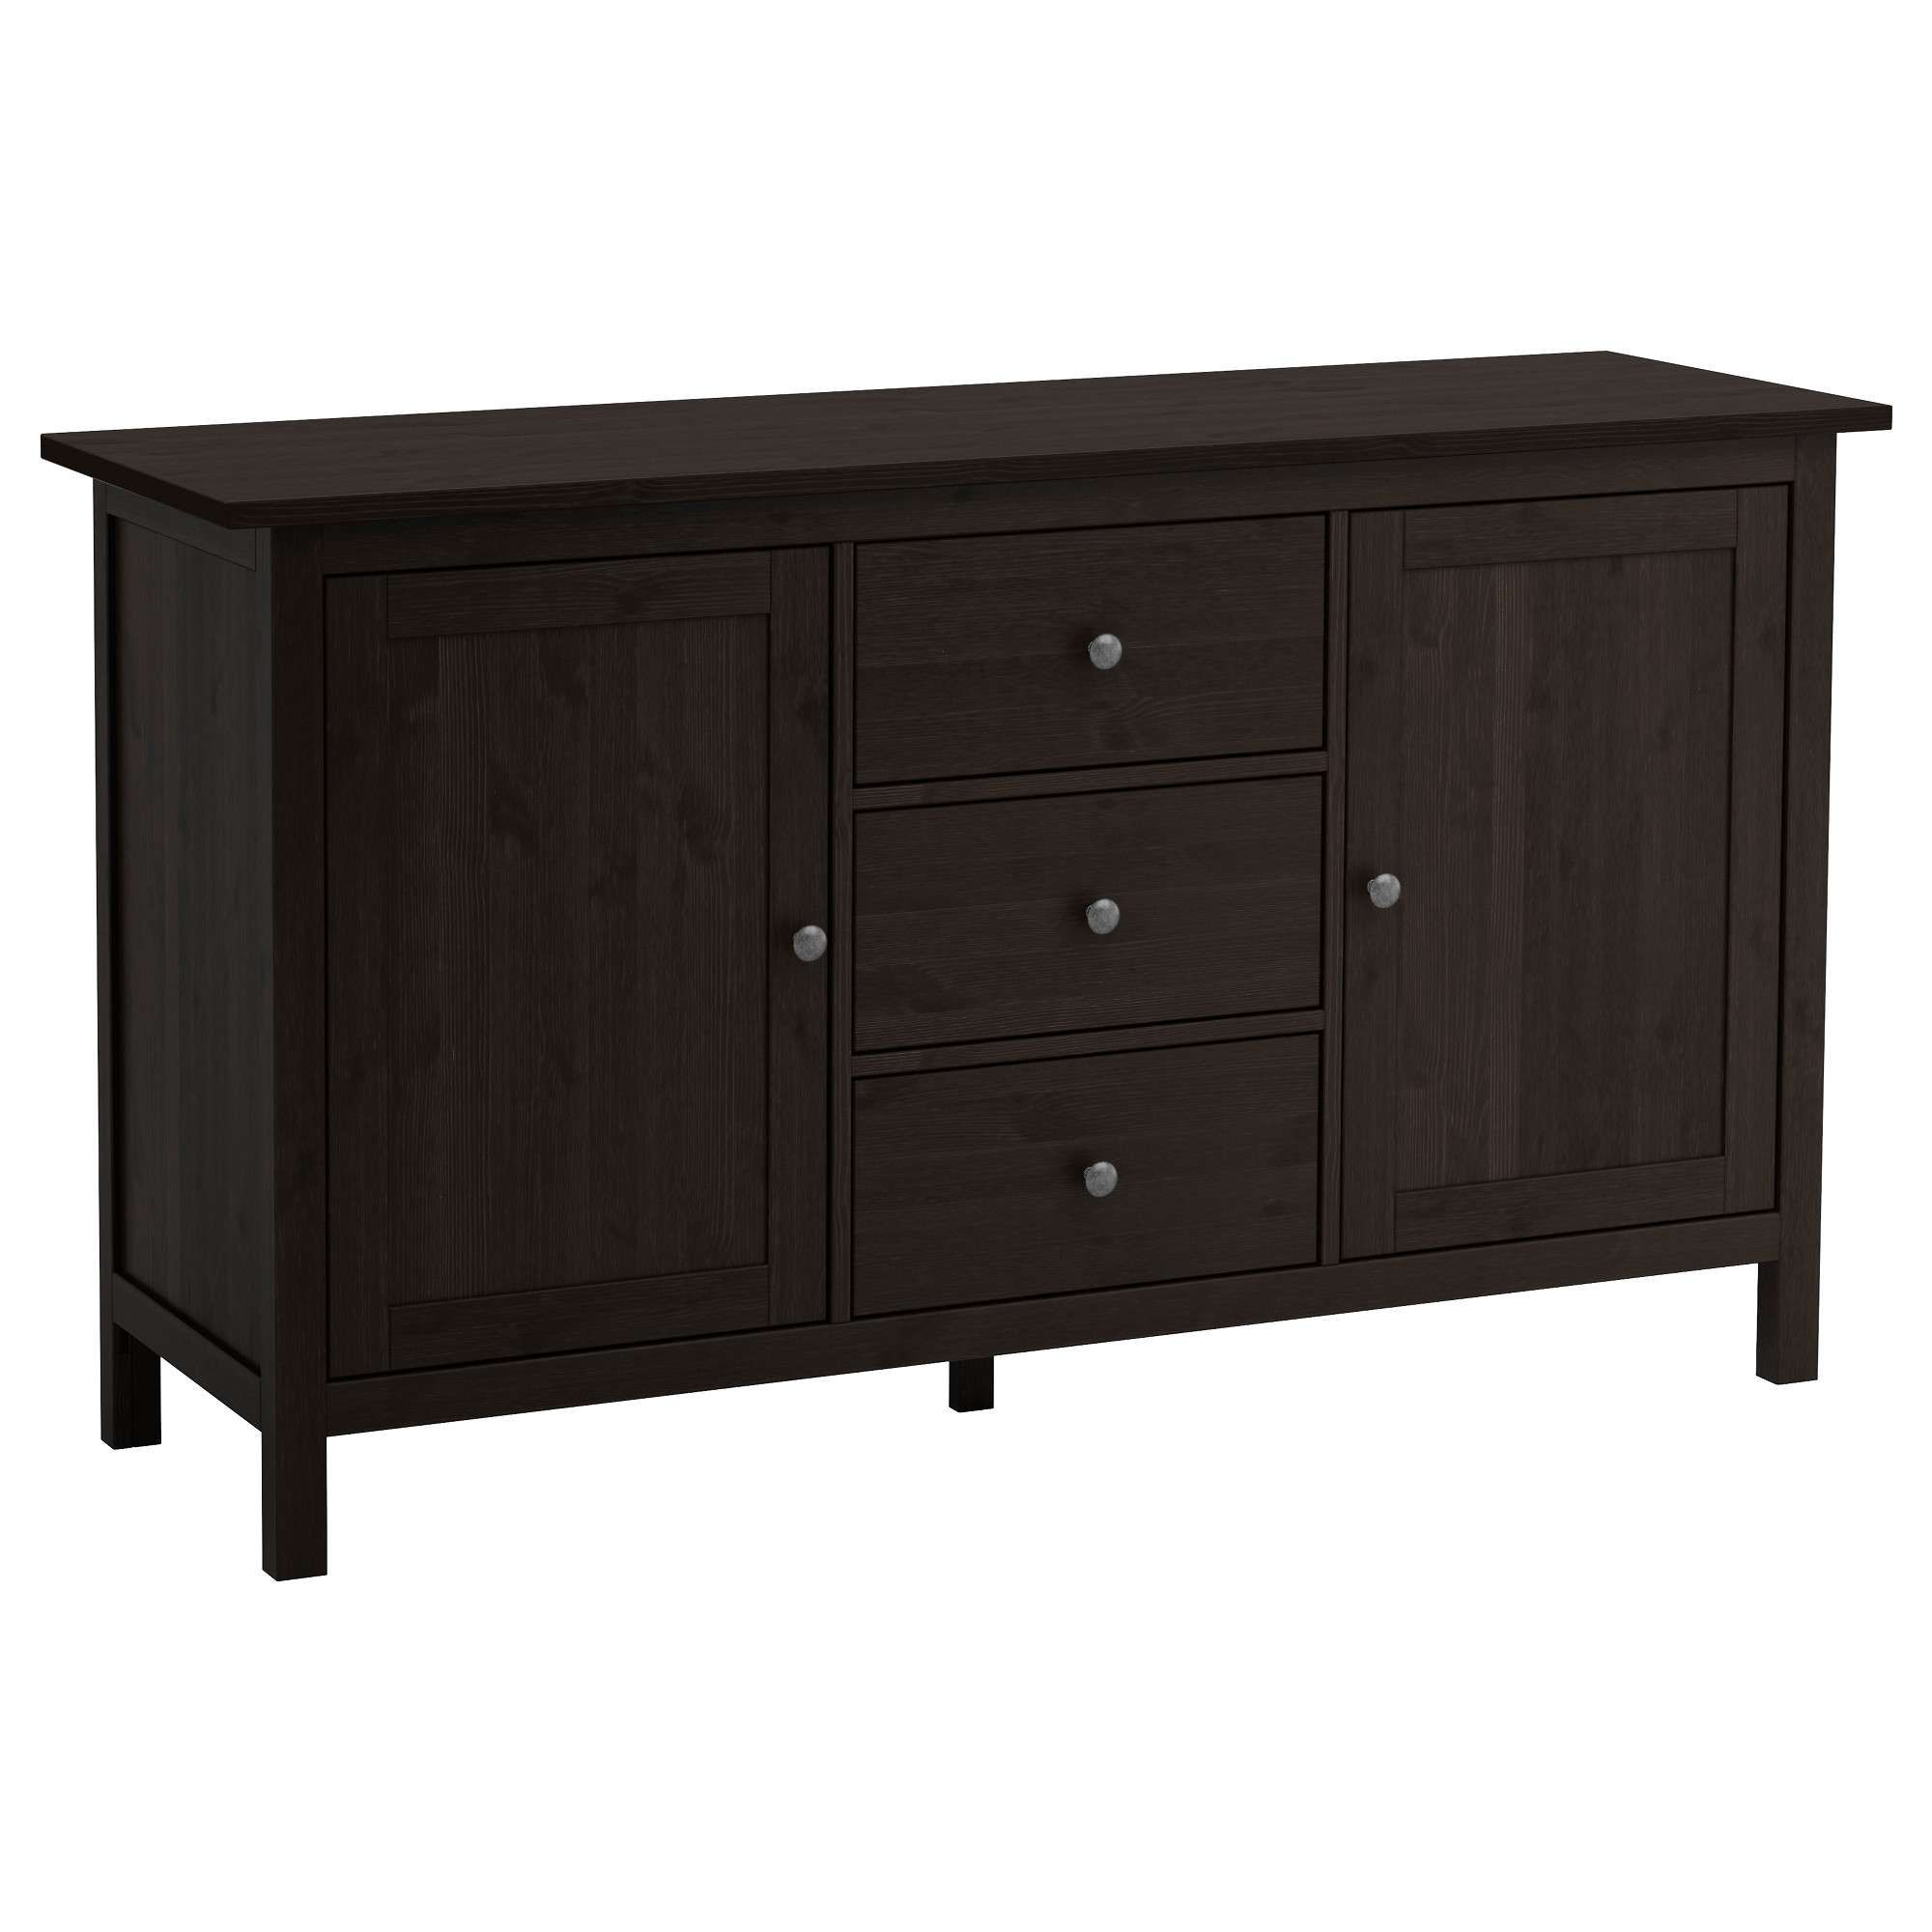 Dining Room Sideboards & Buffet Cabinets – Ikea Pertaining To Canada Ikea Sideboards (View 1 of 20)